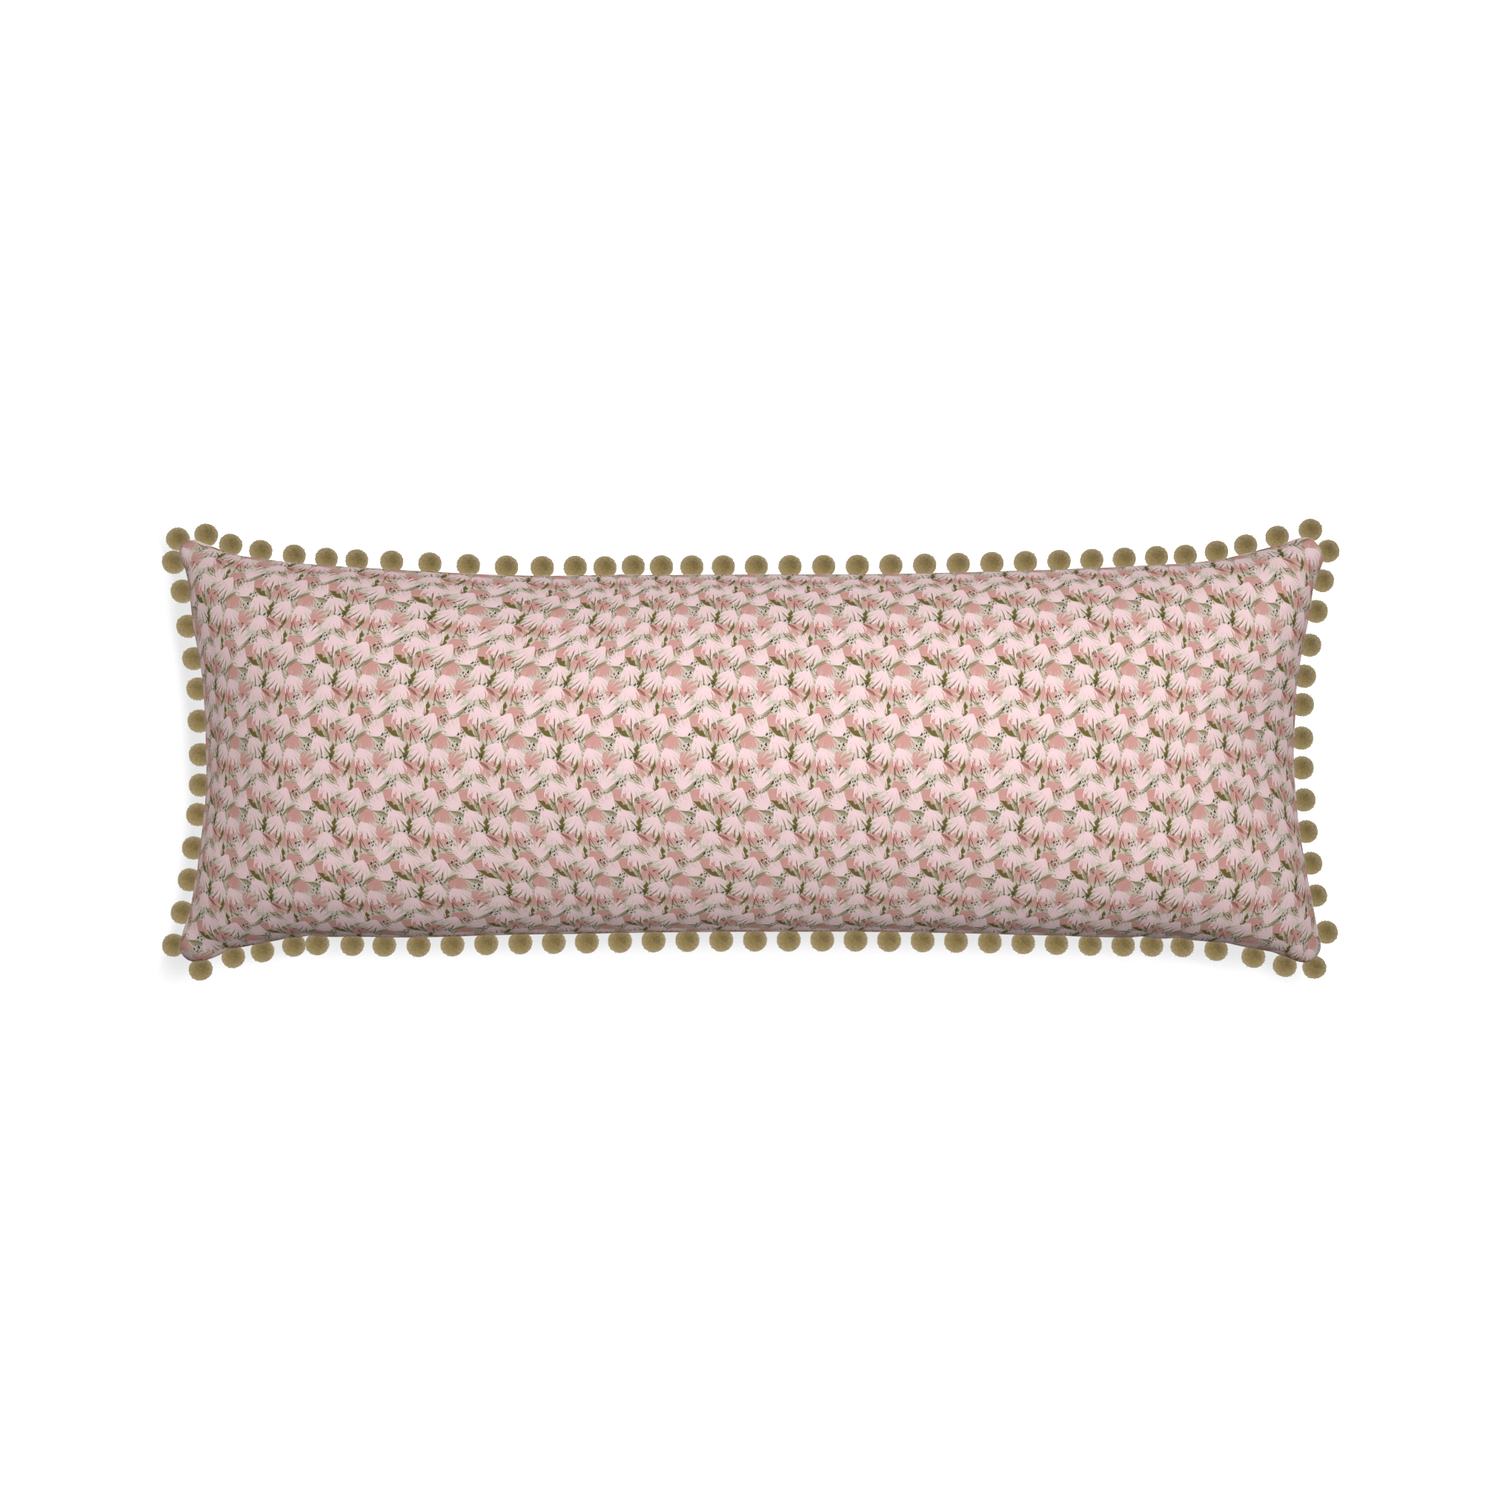 Xl-lumbar eden pink custom pink floralpillow with olive pom pom on white background